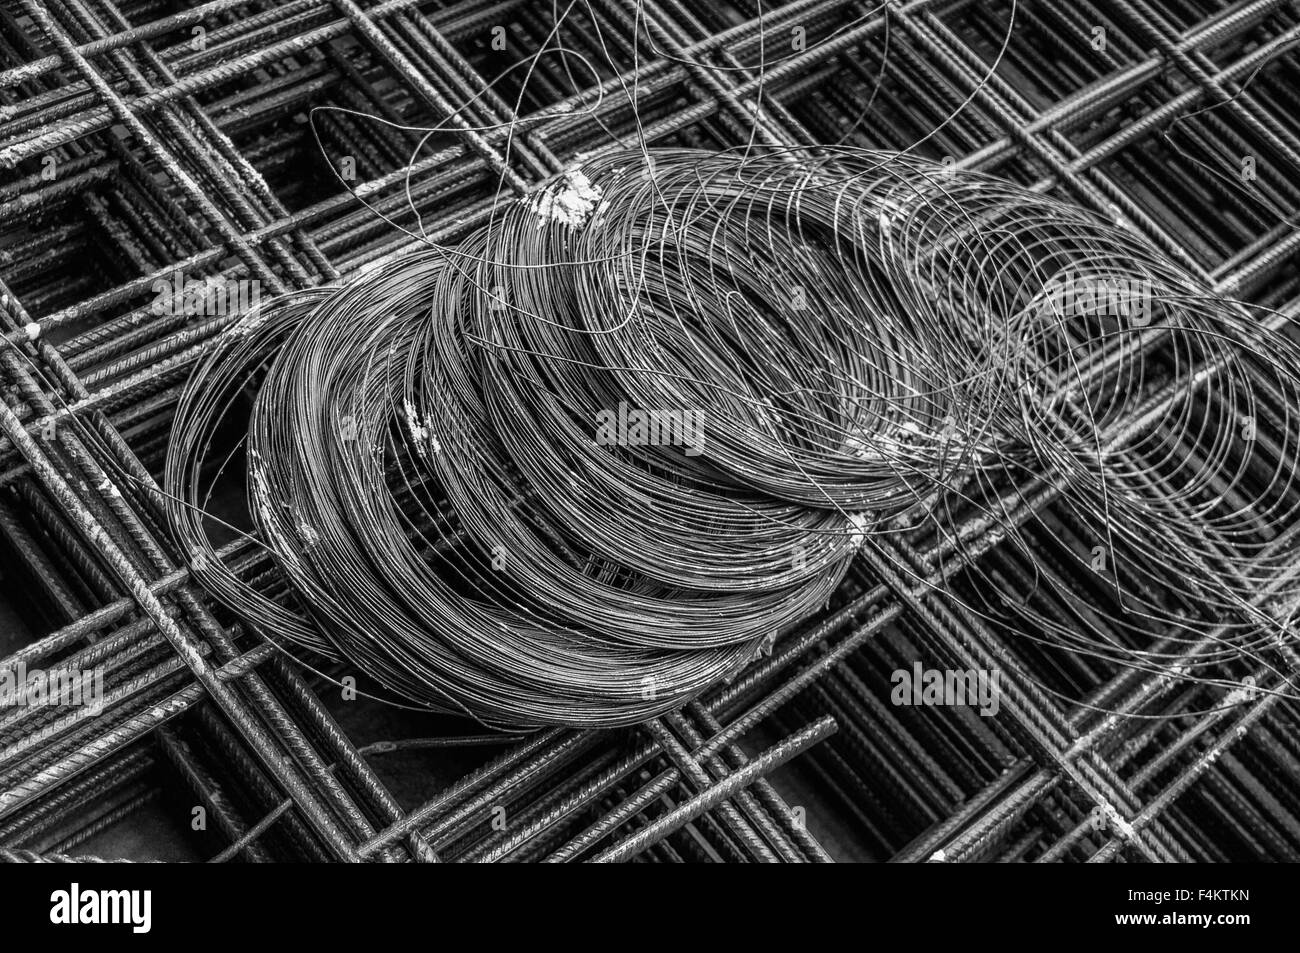 Coil of wire on construction rebar Stock Photo